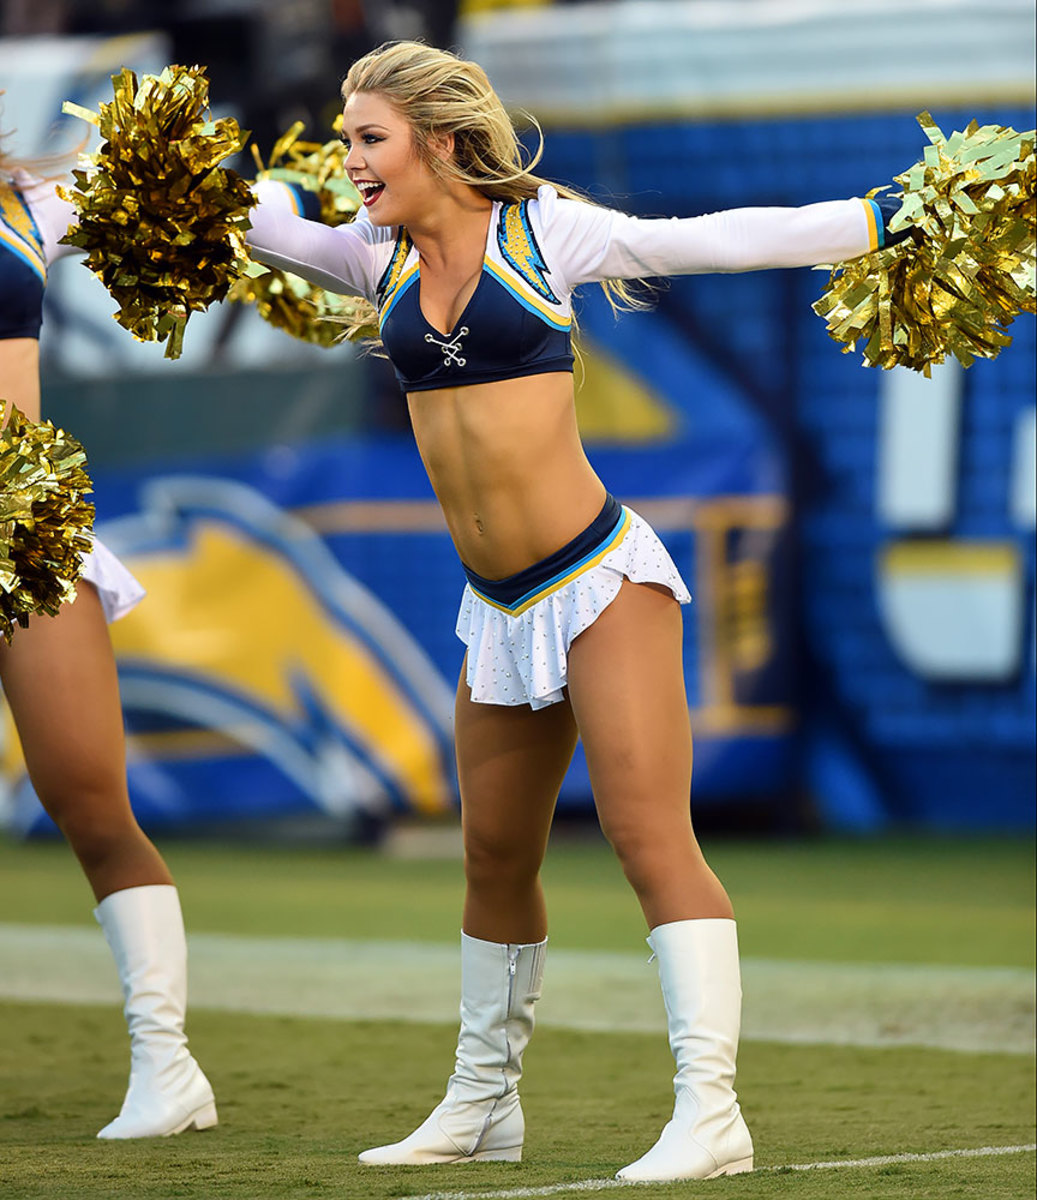 San-Diego-Chargers-cheerleaders-0071608196567_Cardinals_at_Chargers.jpg